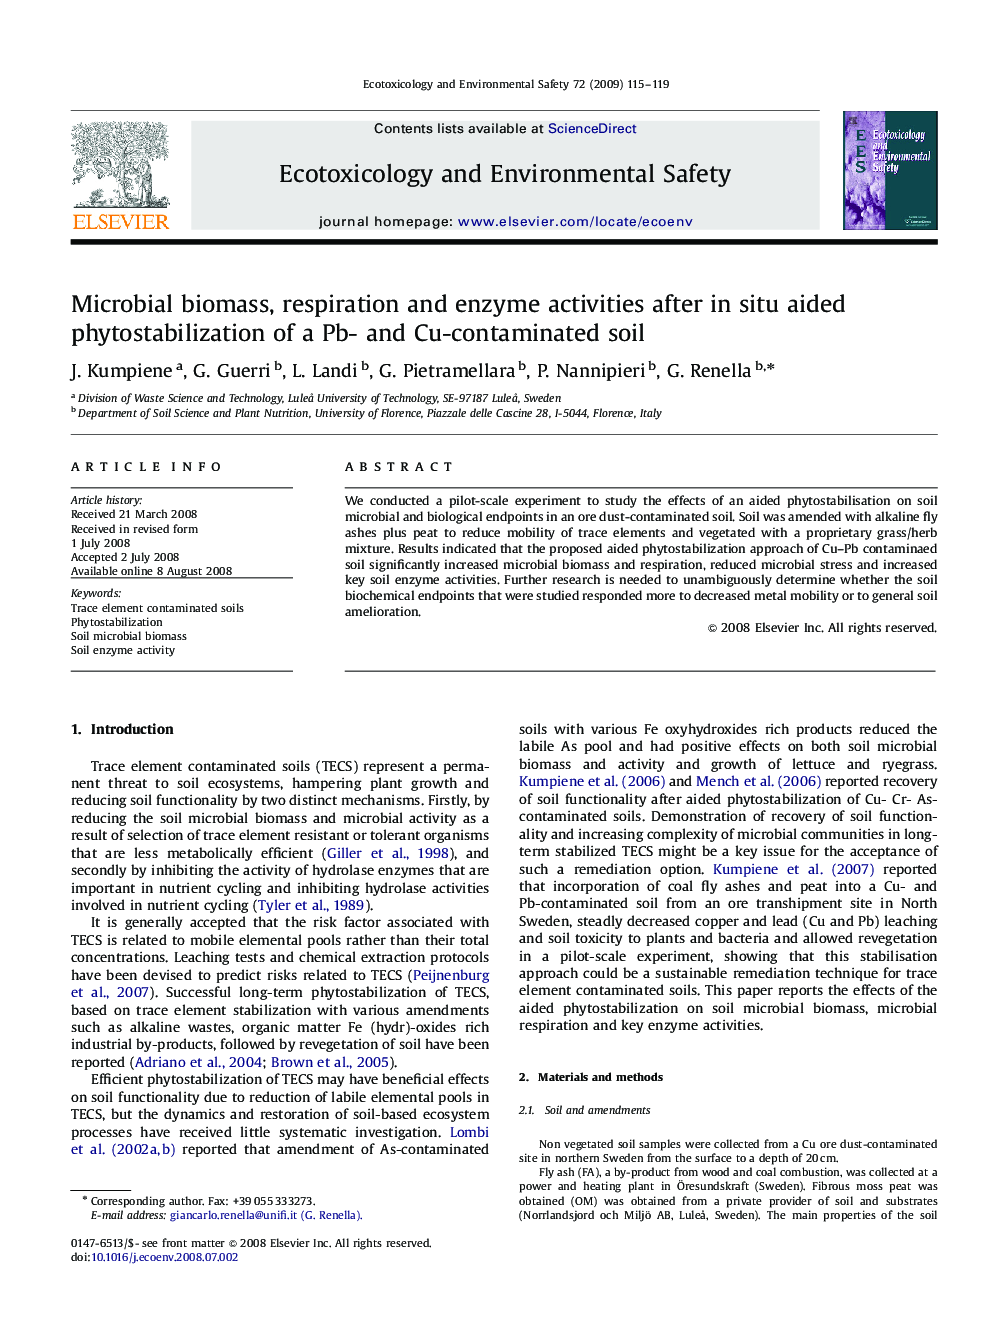 Microbial biomass, respiration and enzyme activities after in situ aided phytostabilization of a Pb- and Cu-contaminated soil